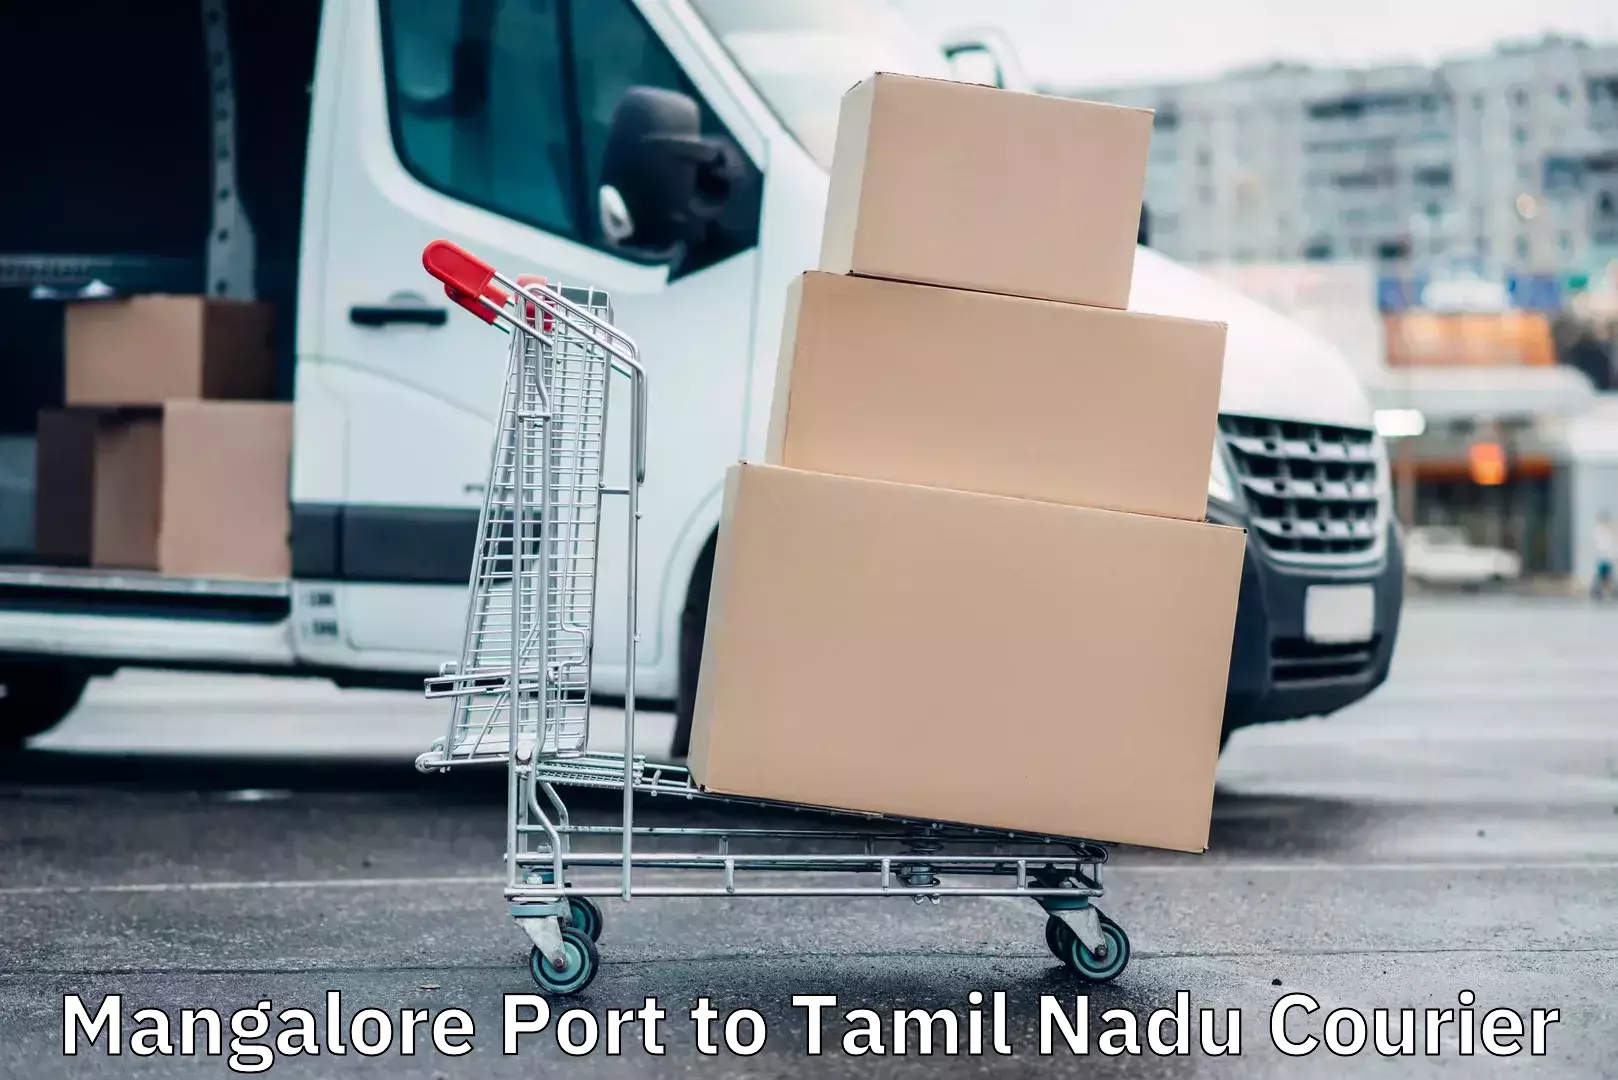 Cost-effective courier options Mangalore Port to Tamil Nadu